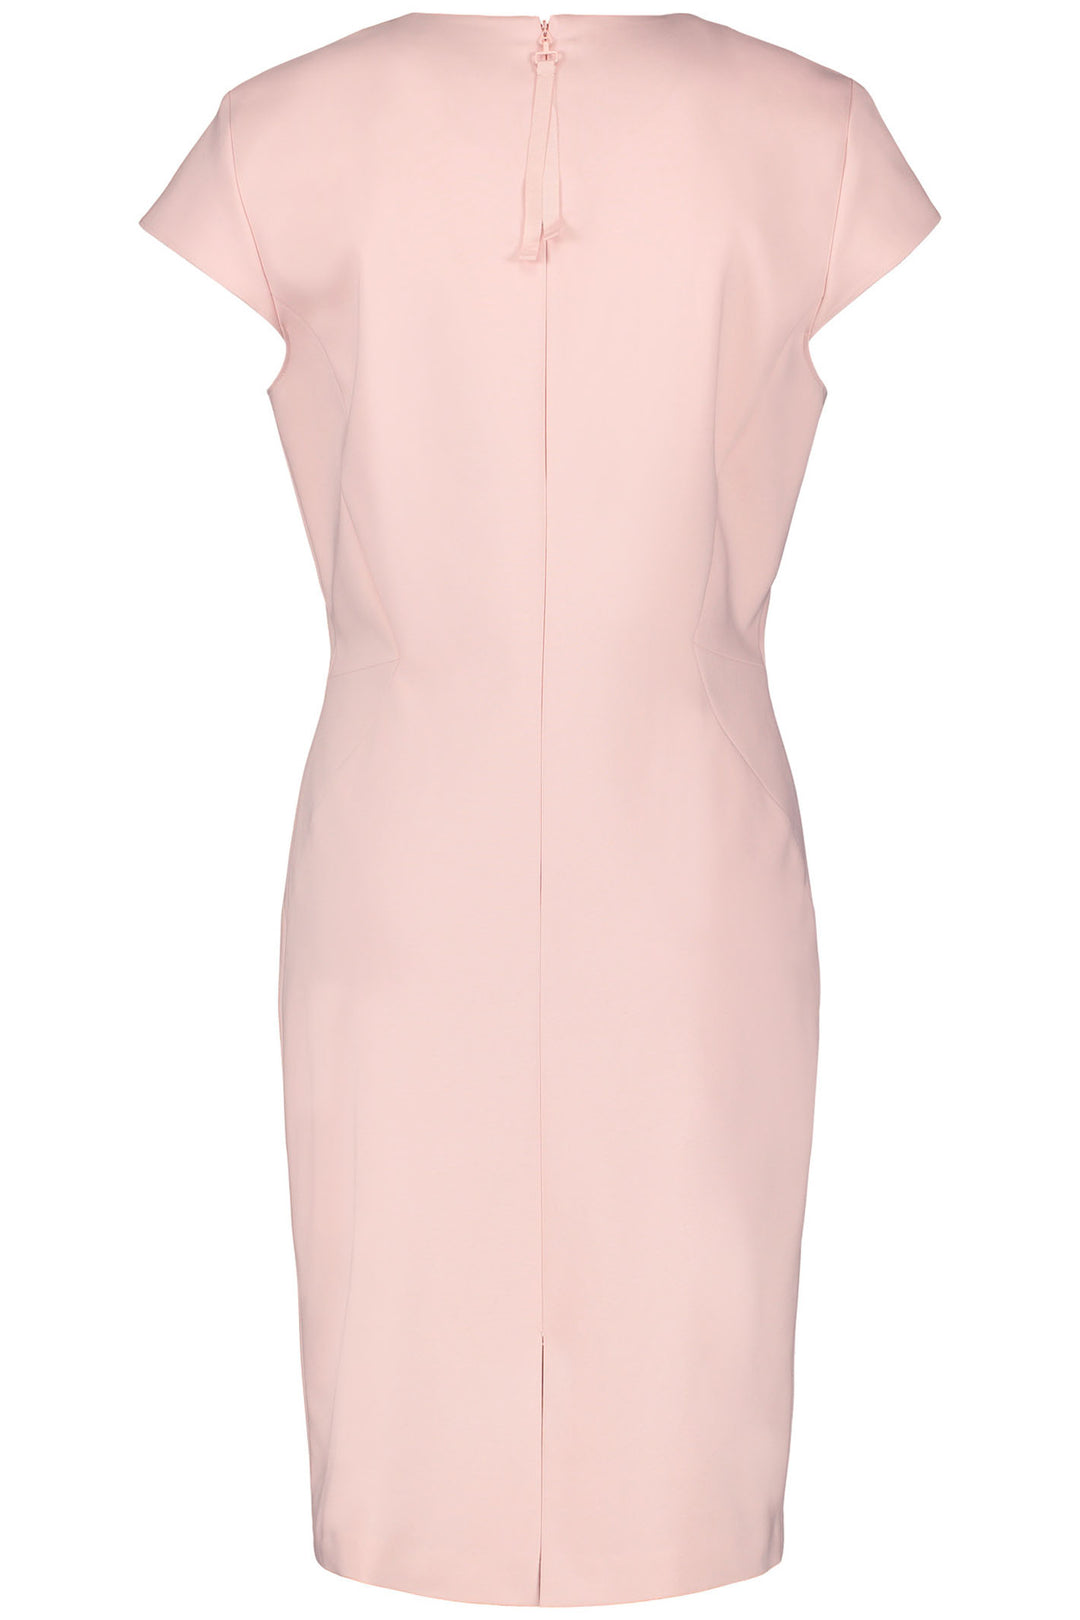 Gerry Weber 380031 Lotus Pink Shift Dress - Experience Boutique